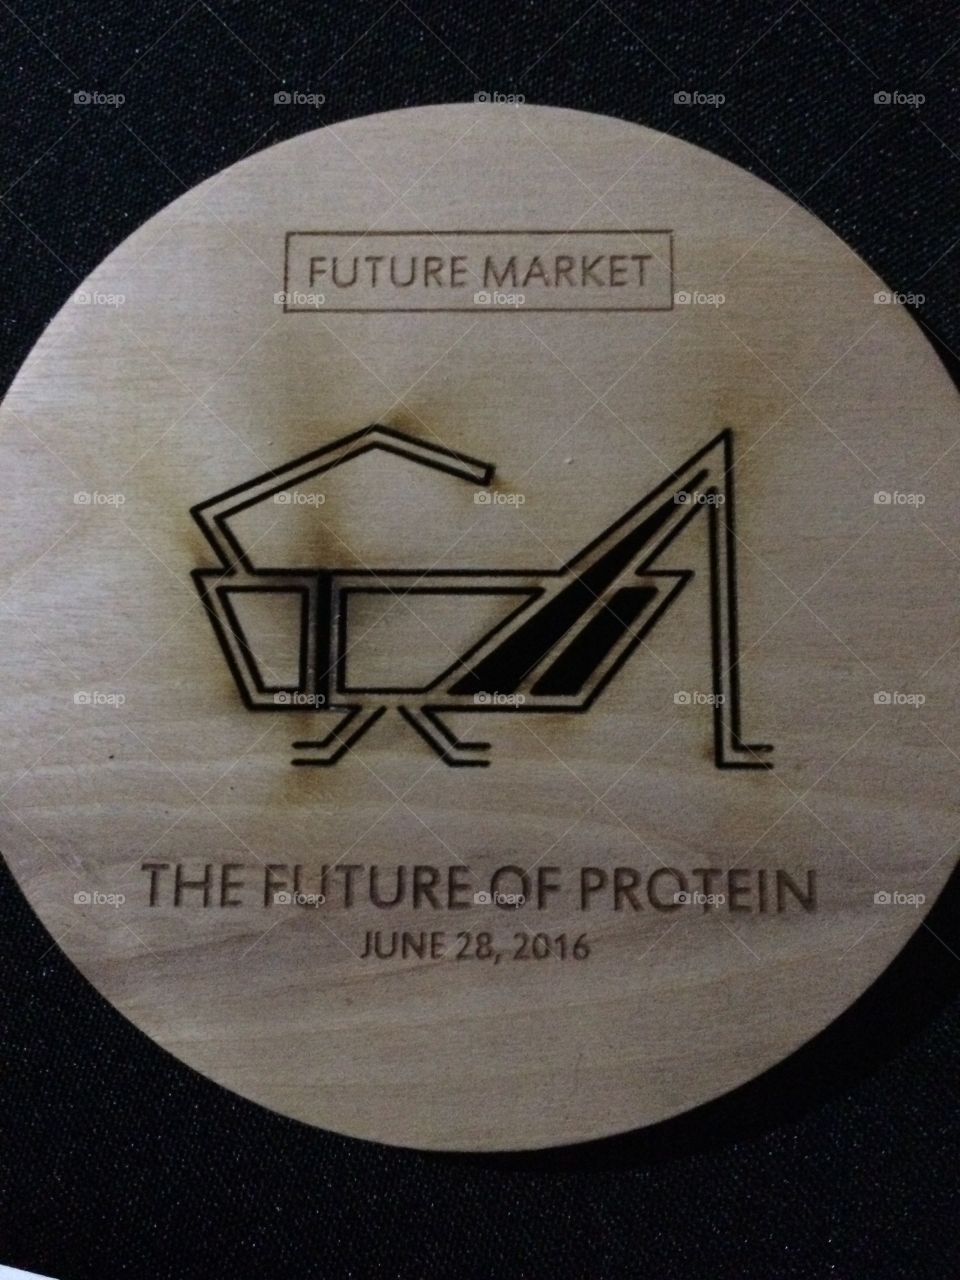 Future of protein dinner